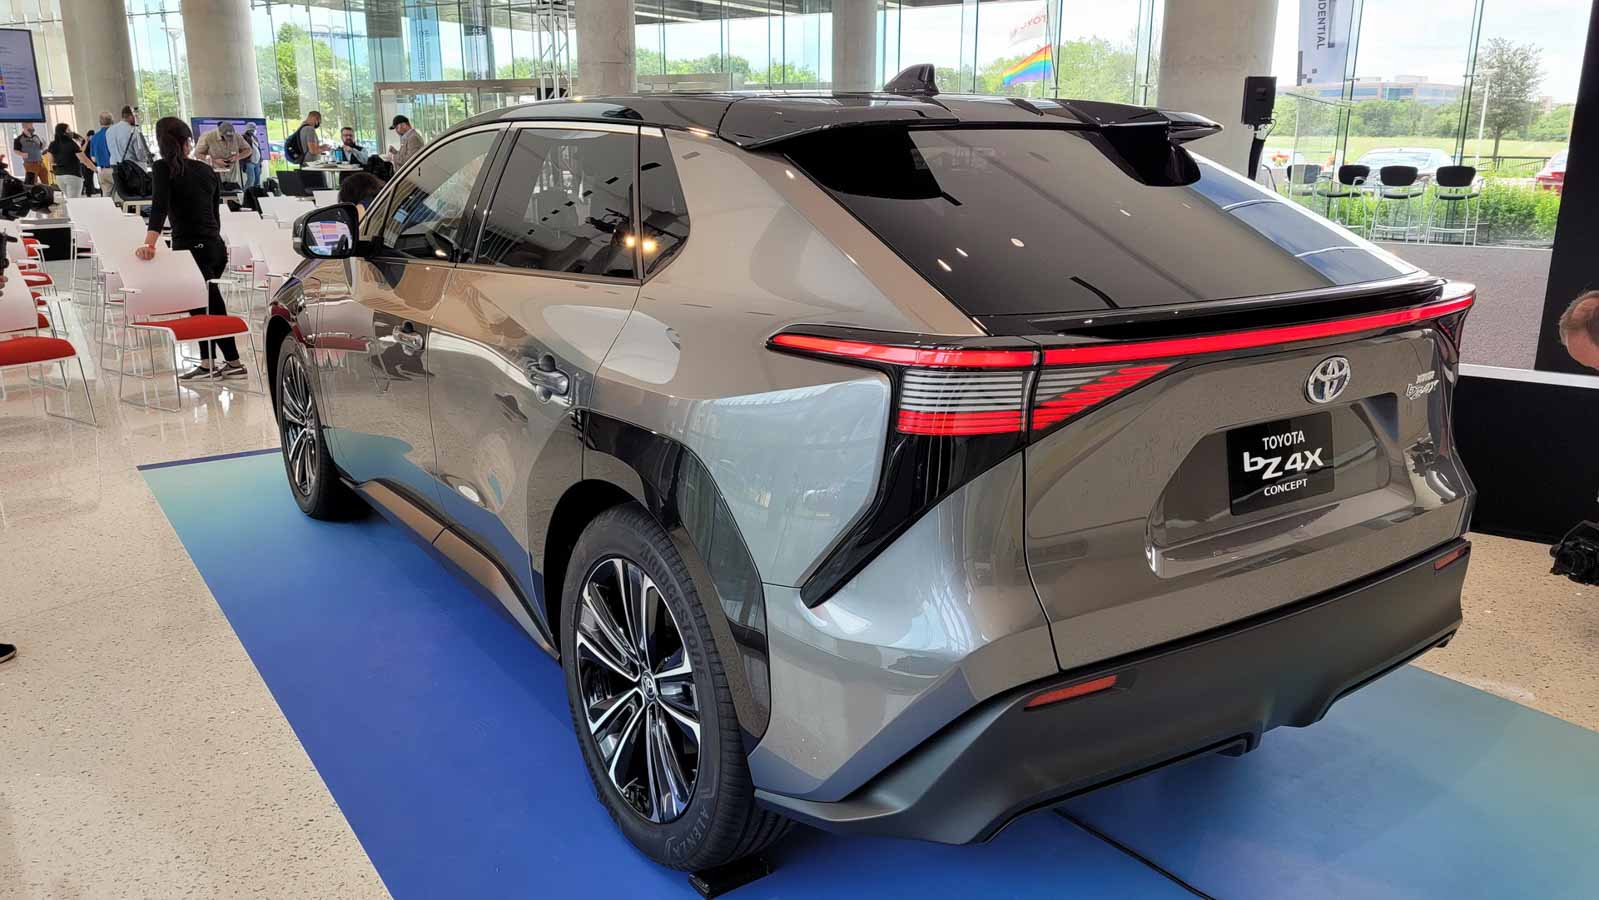 Toyota bZ4X Concept Previews Electric SUV For 2022 - Real World Pics